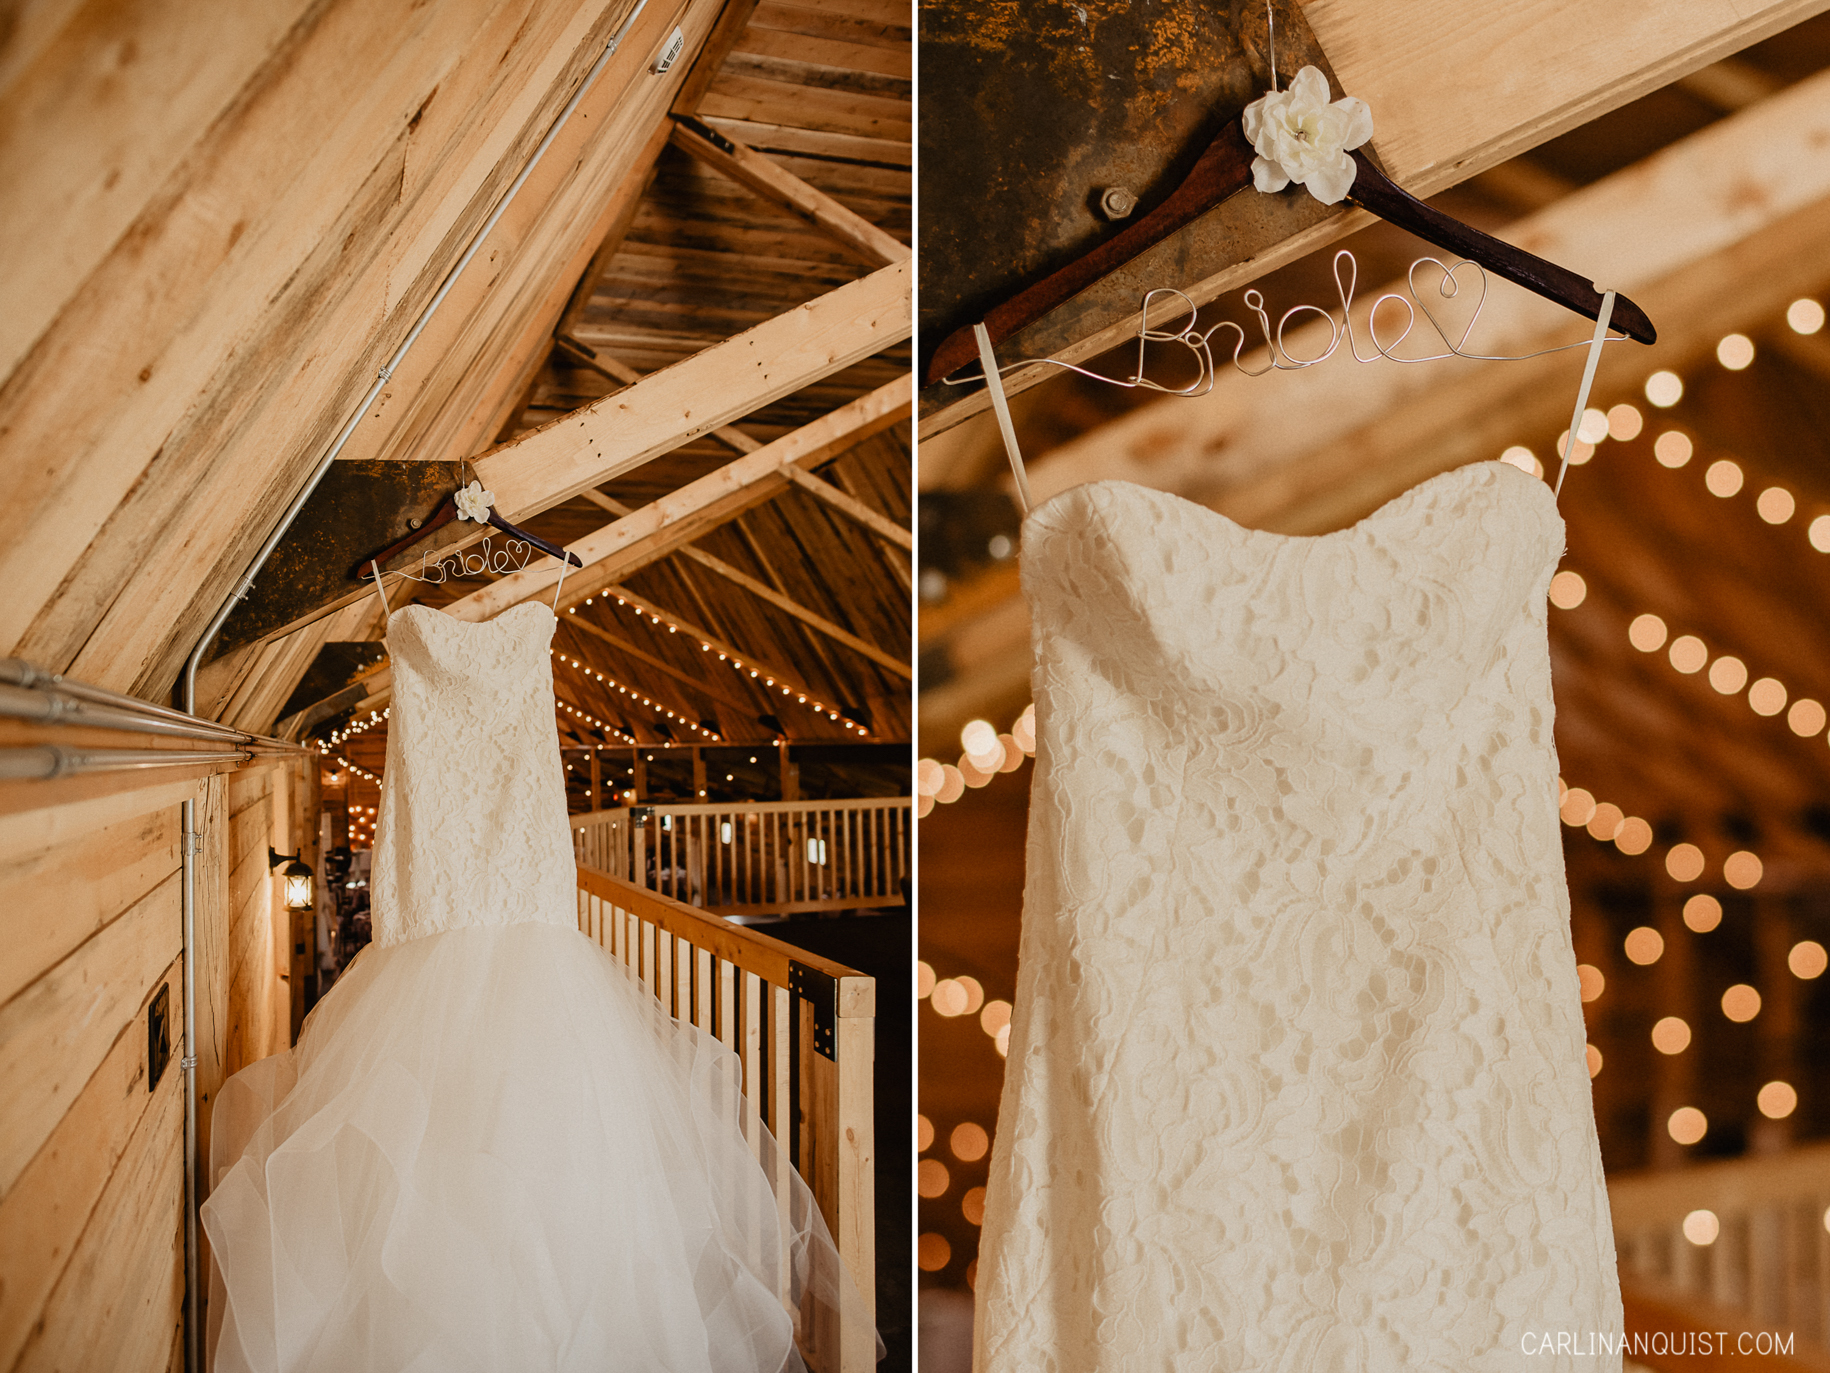 Bridal Gown | Willow Lane Barn 